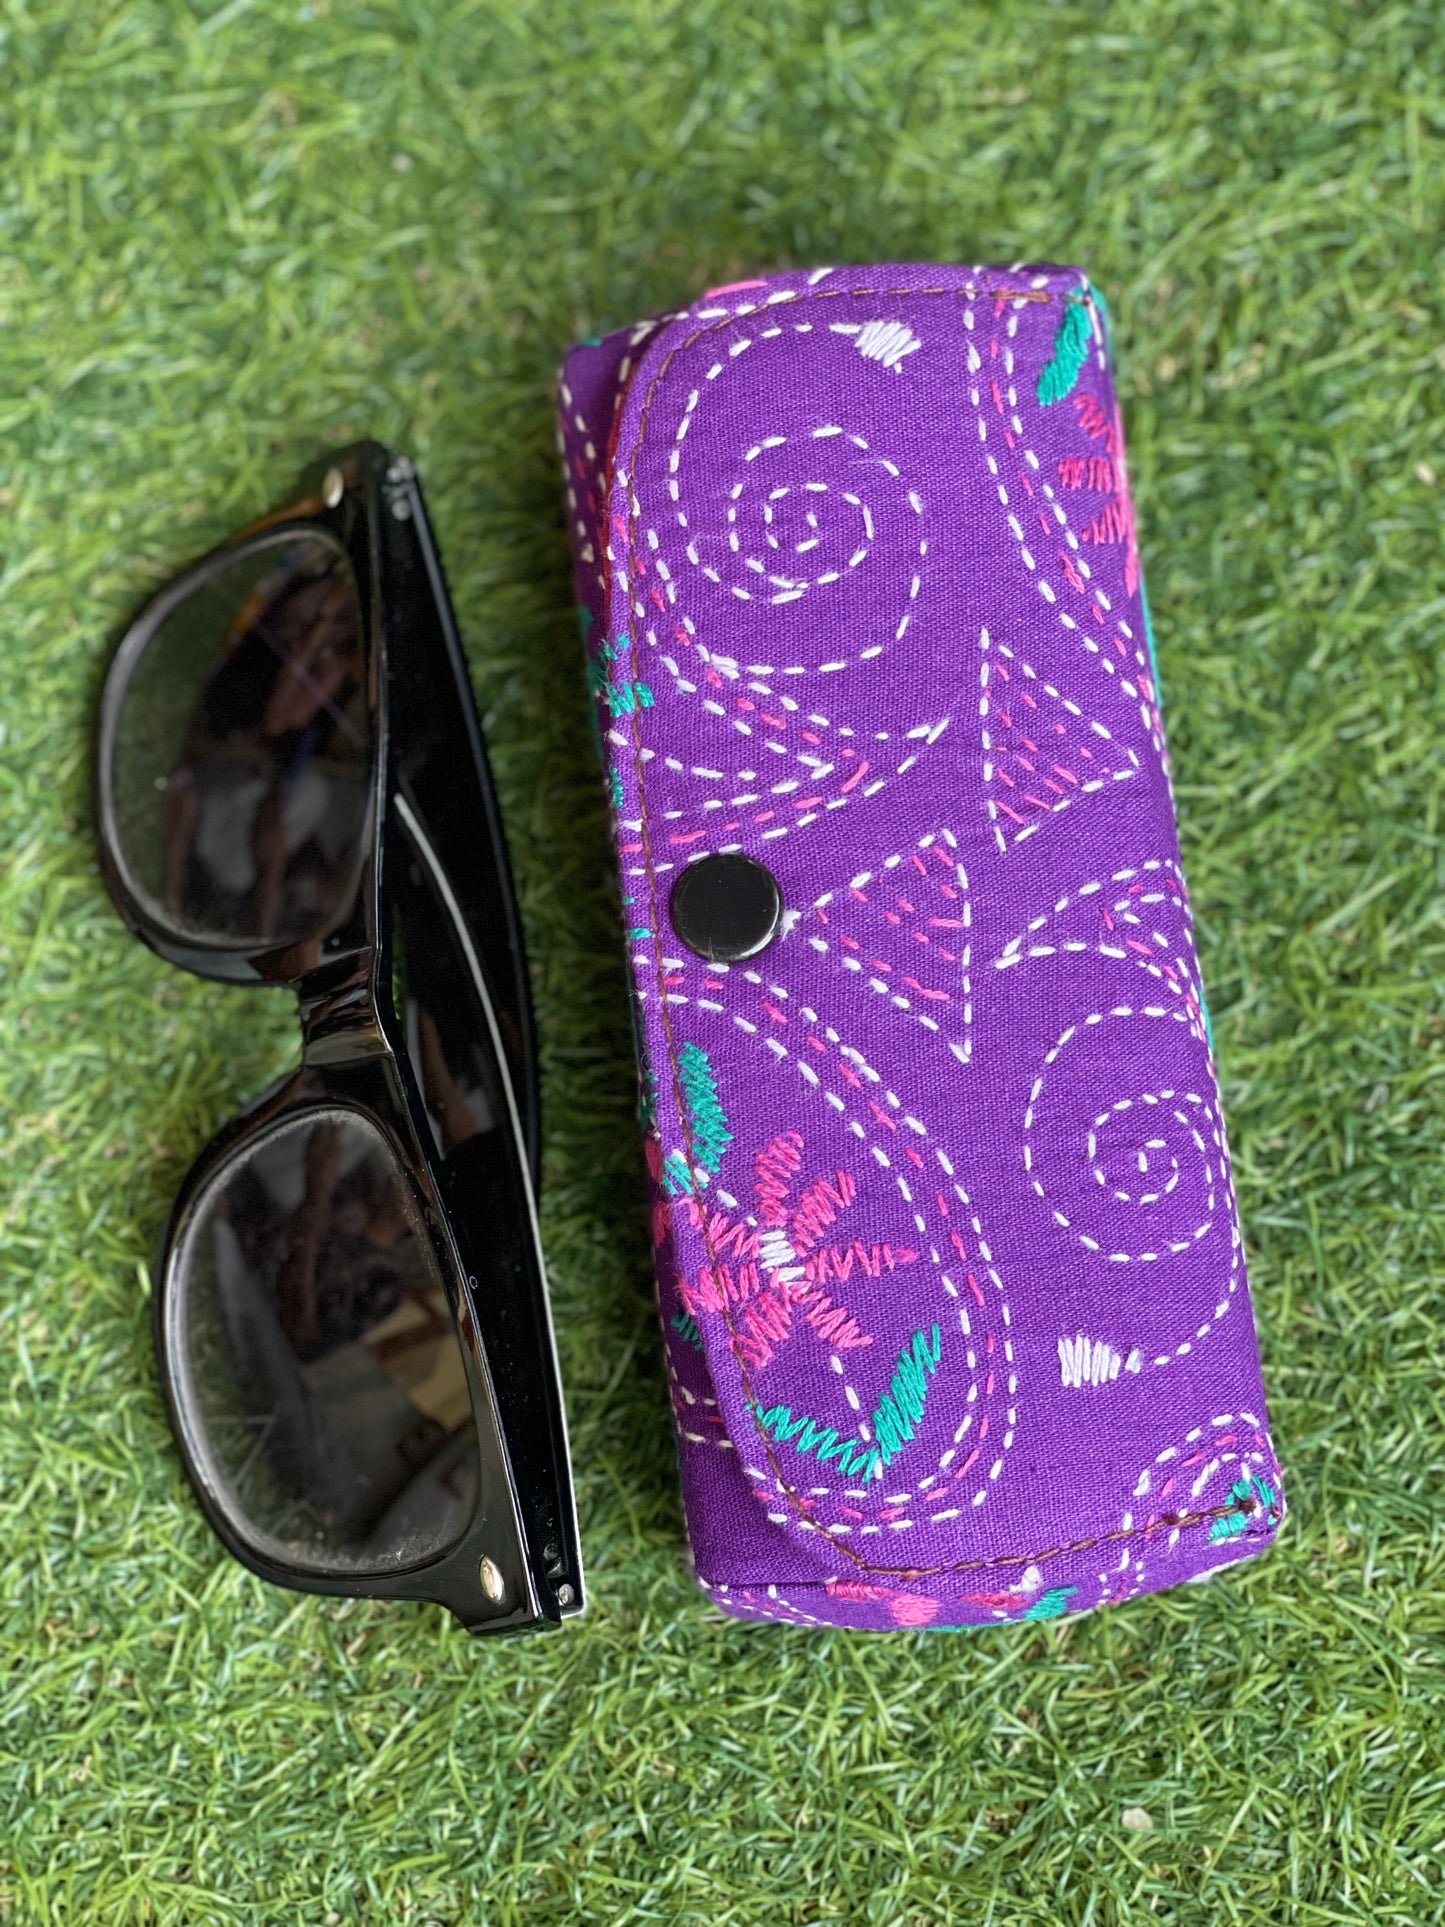 Spectacles case - cotton kantha embroidery - purple